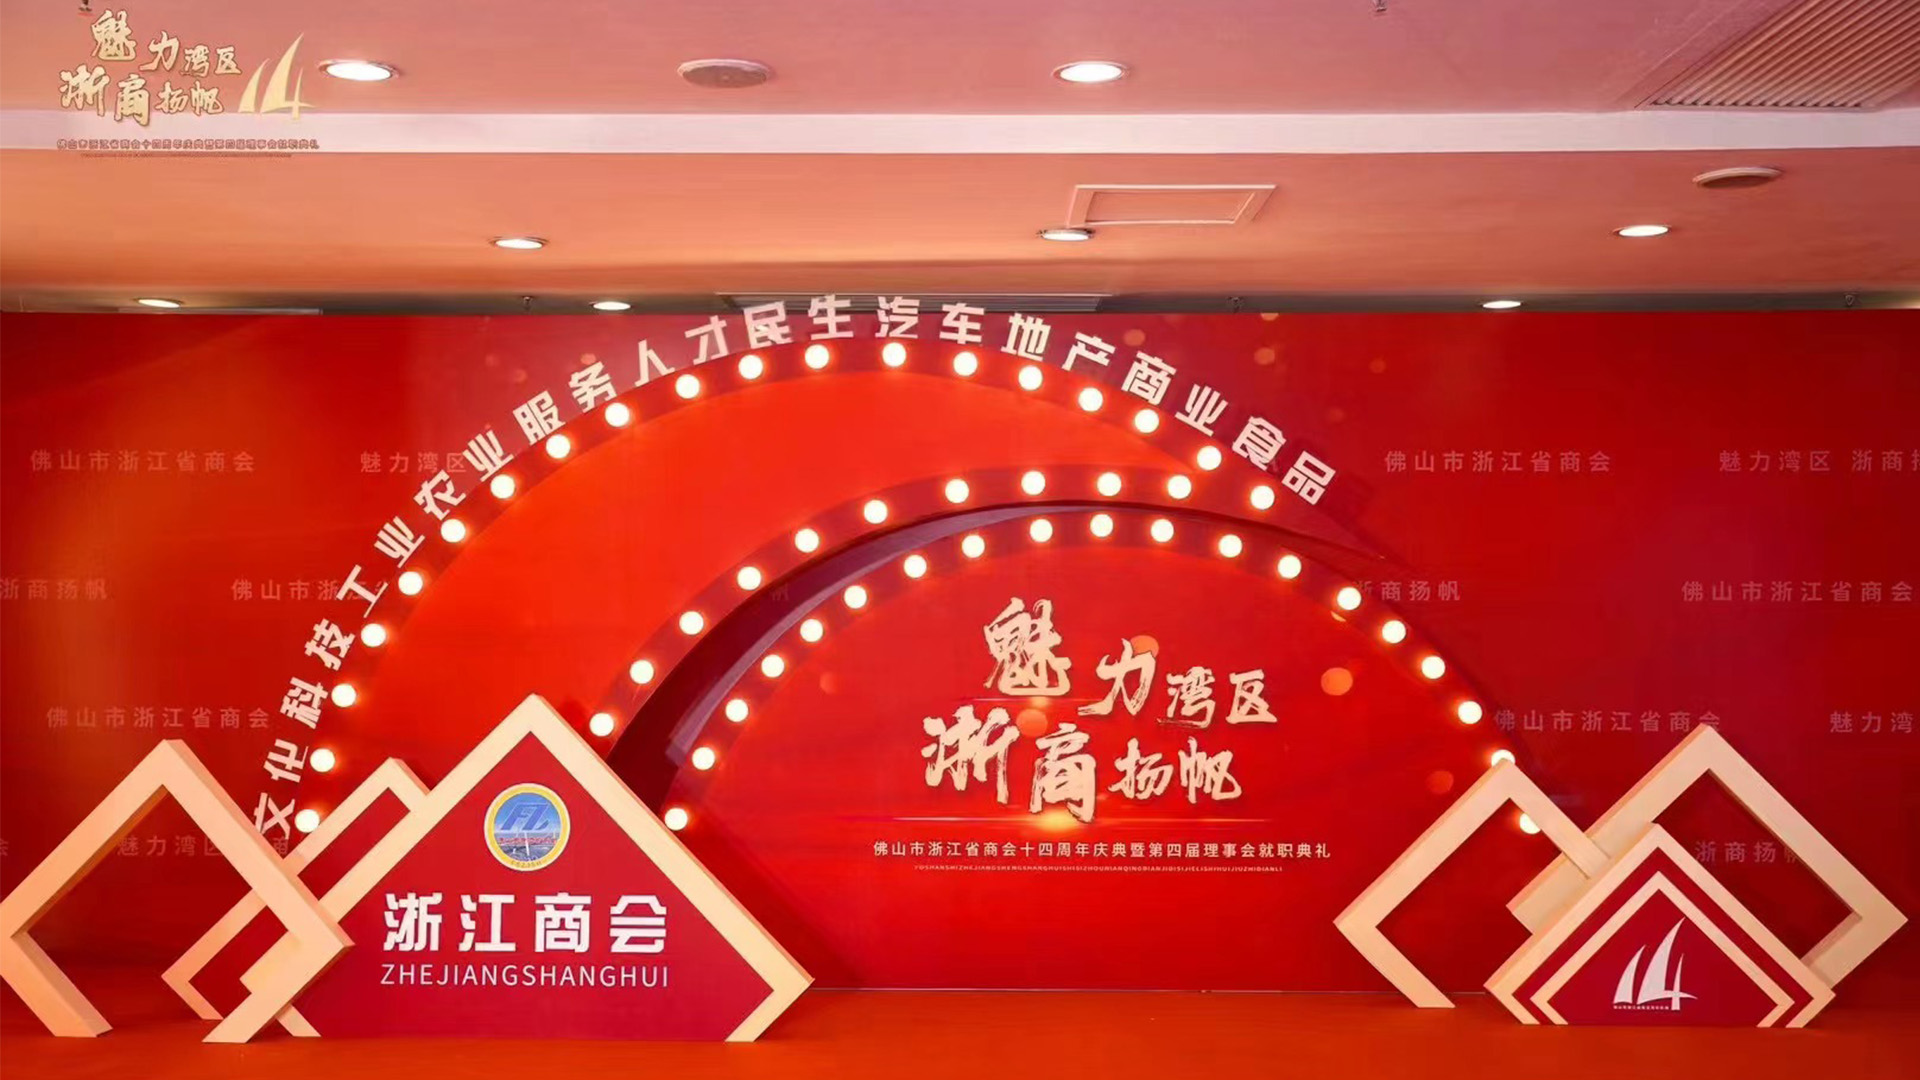 Grand Inaugural Ceremony of Zhejiang Chamber of Commerce Held in Foshan, Expertly Executed by D2 Studio_3